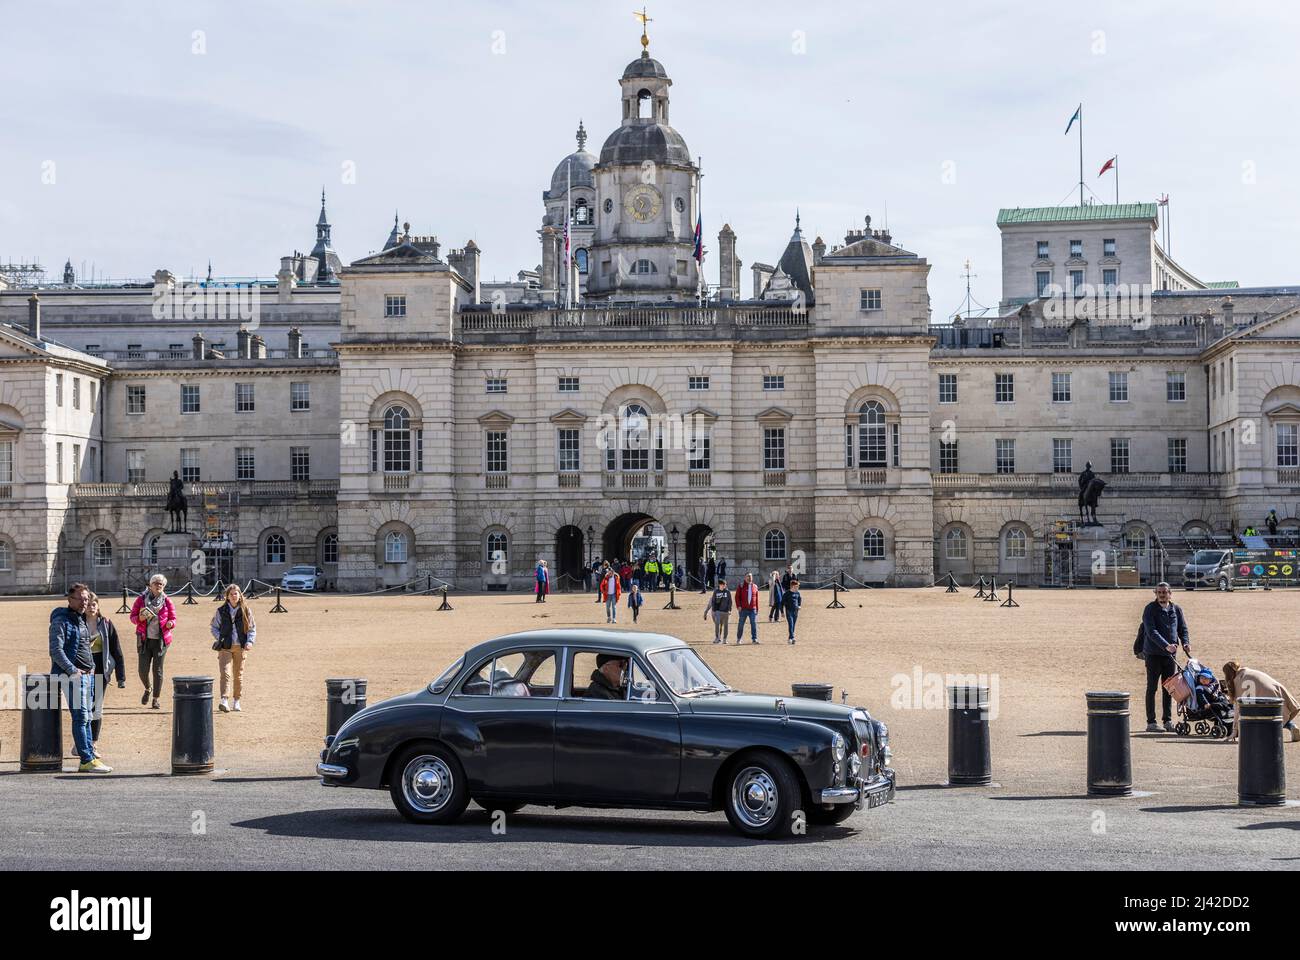 1958 MG Magnette Varitone stops on the perimeter of Horse Guards Parade in Whitehall, London, UK. April, 2022 Stock Photo